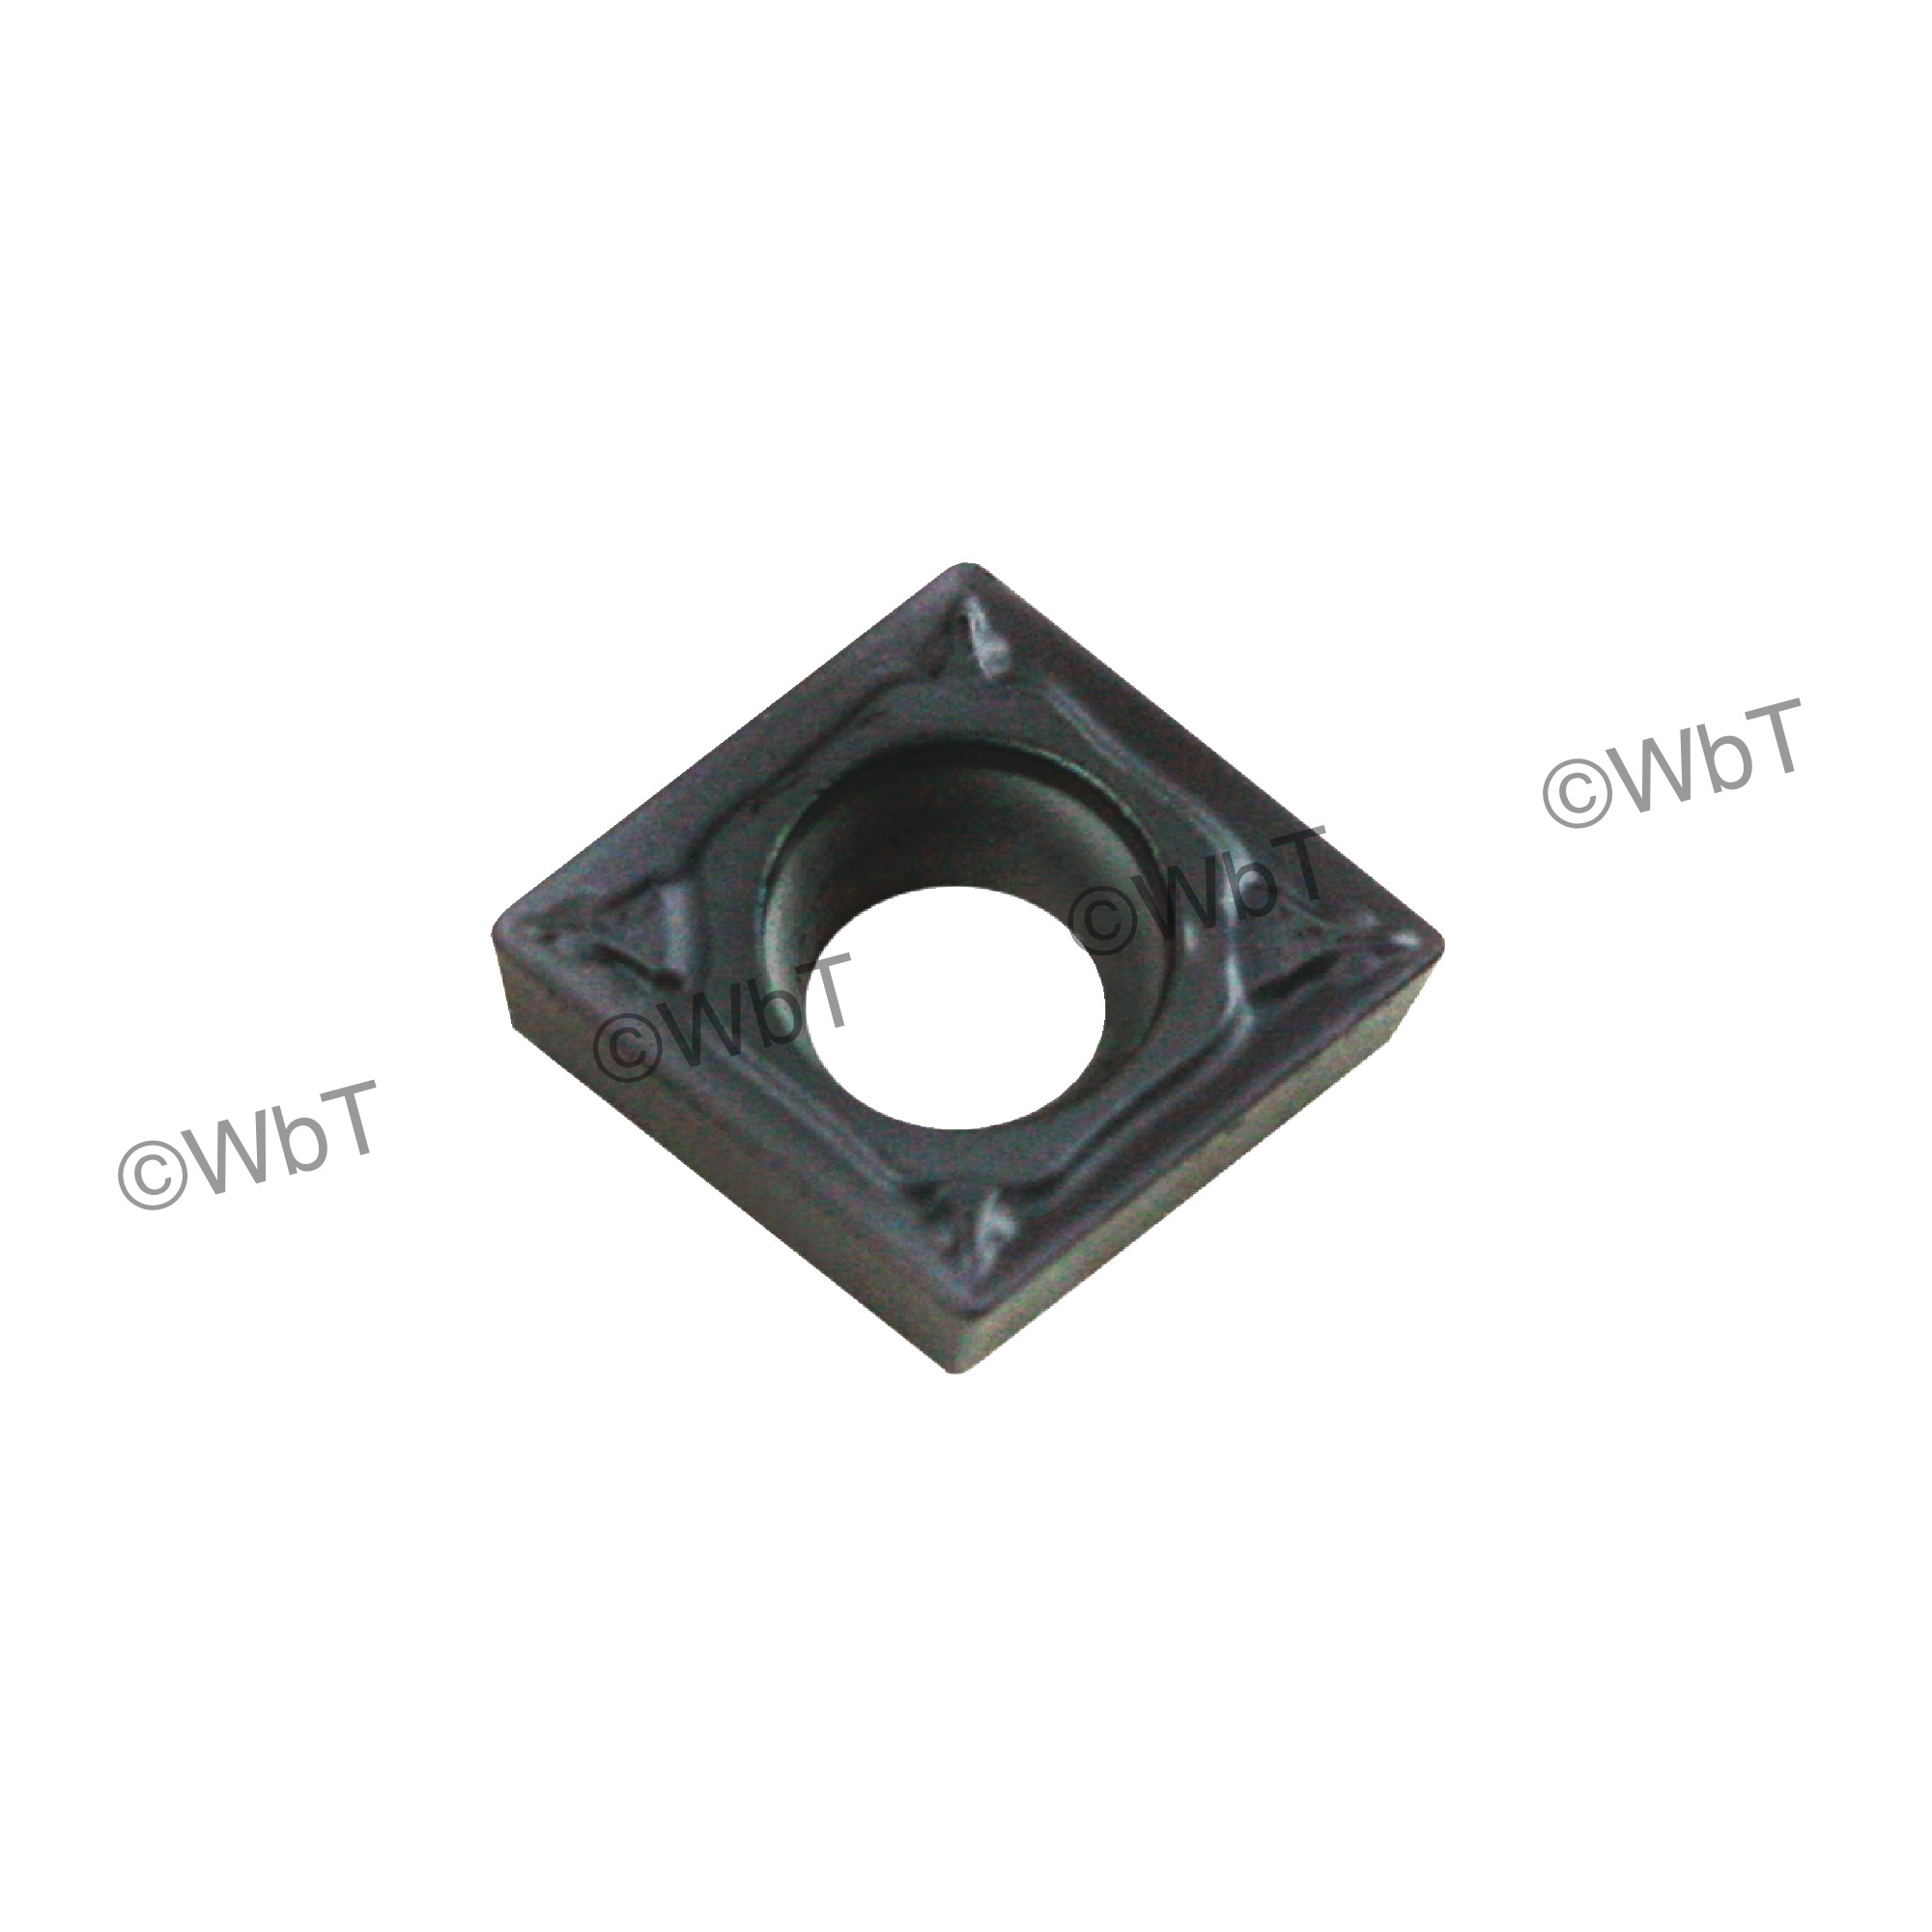 TTC PRODUCTION - CCMT3(2.5)1 TiAlN - 80&#176; Diamond / Indexable Carbide Turning Insert